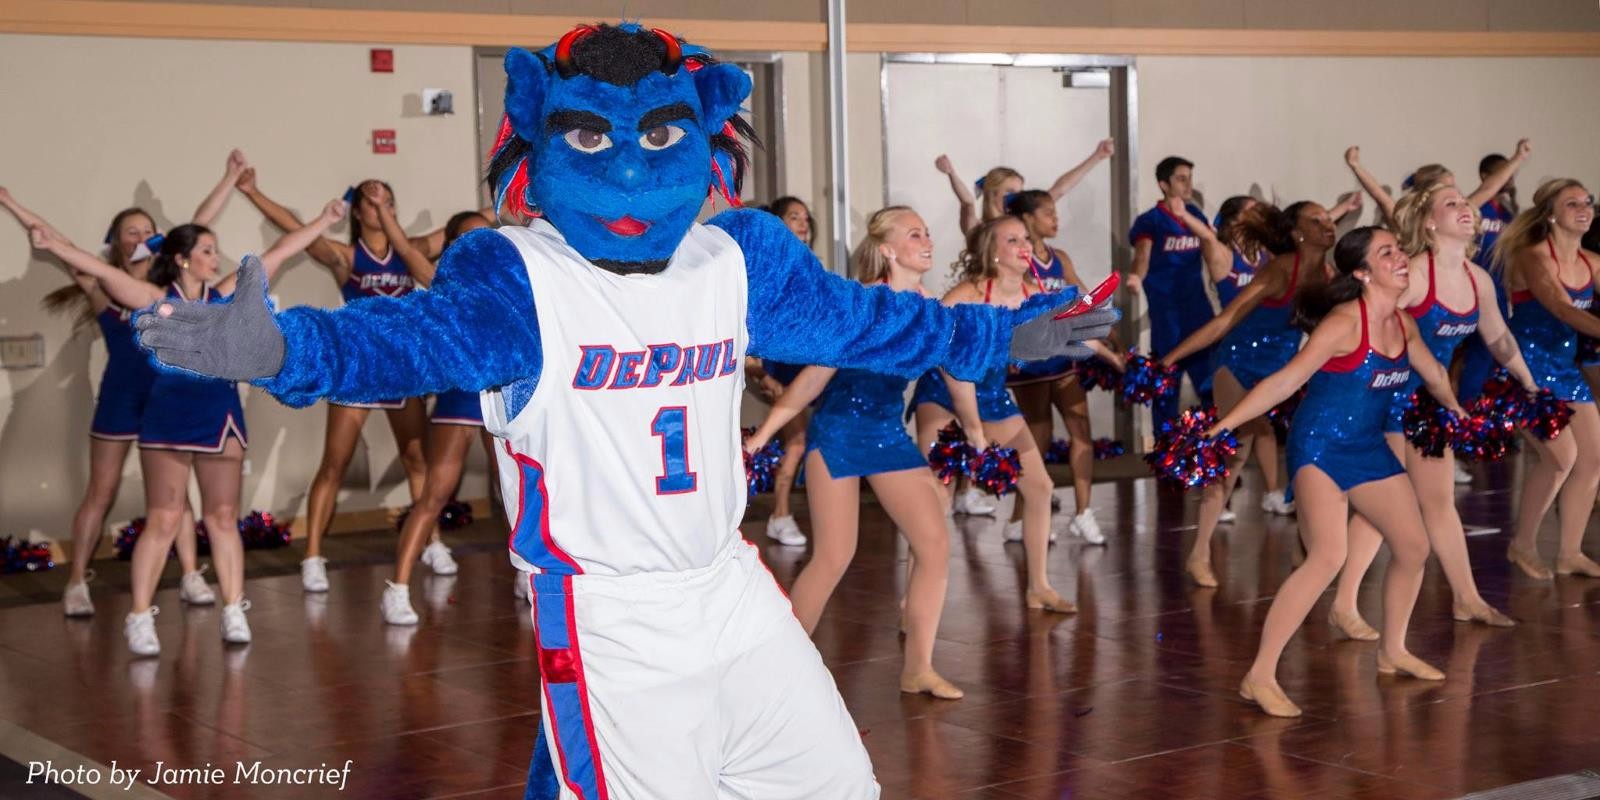 Welcome Week 2018 Events Division of Student Affairs DePaul